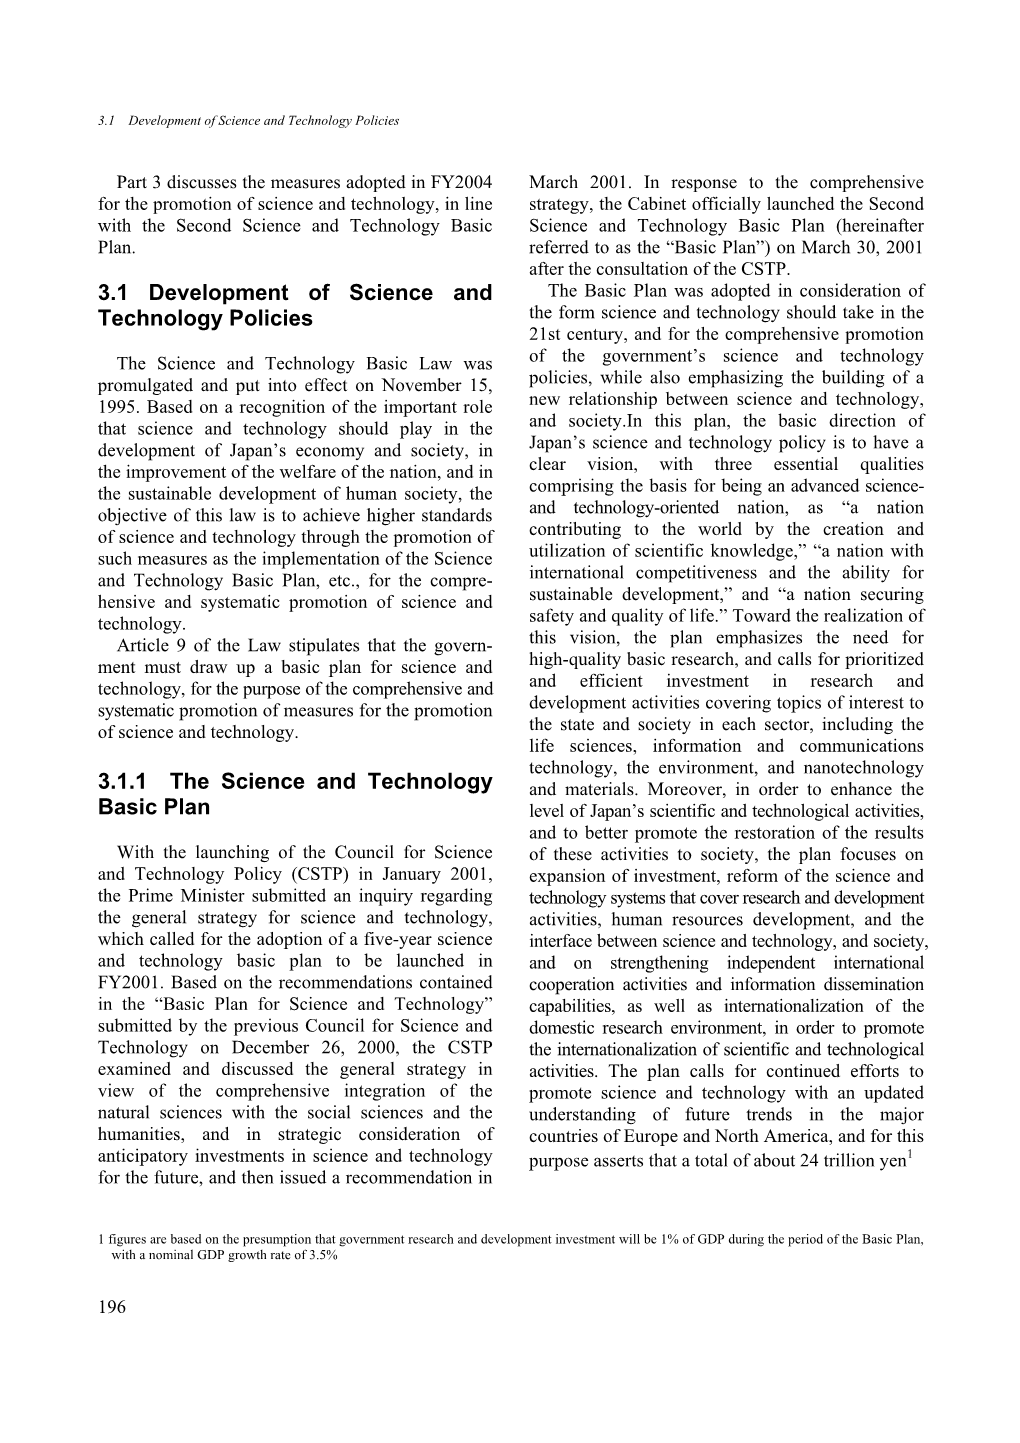 3.1 Development of Science and Technology Policies [PDF:672KB]